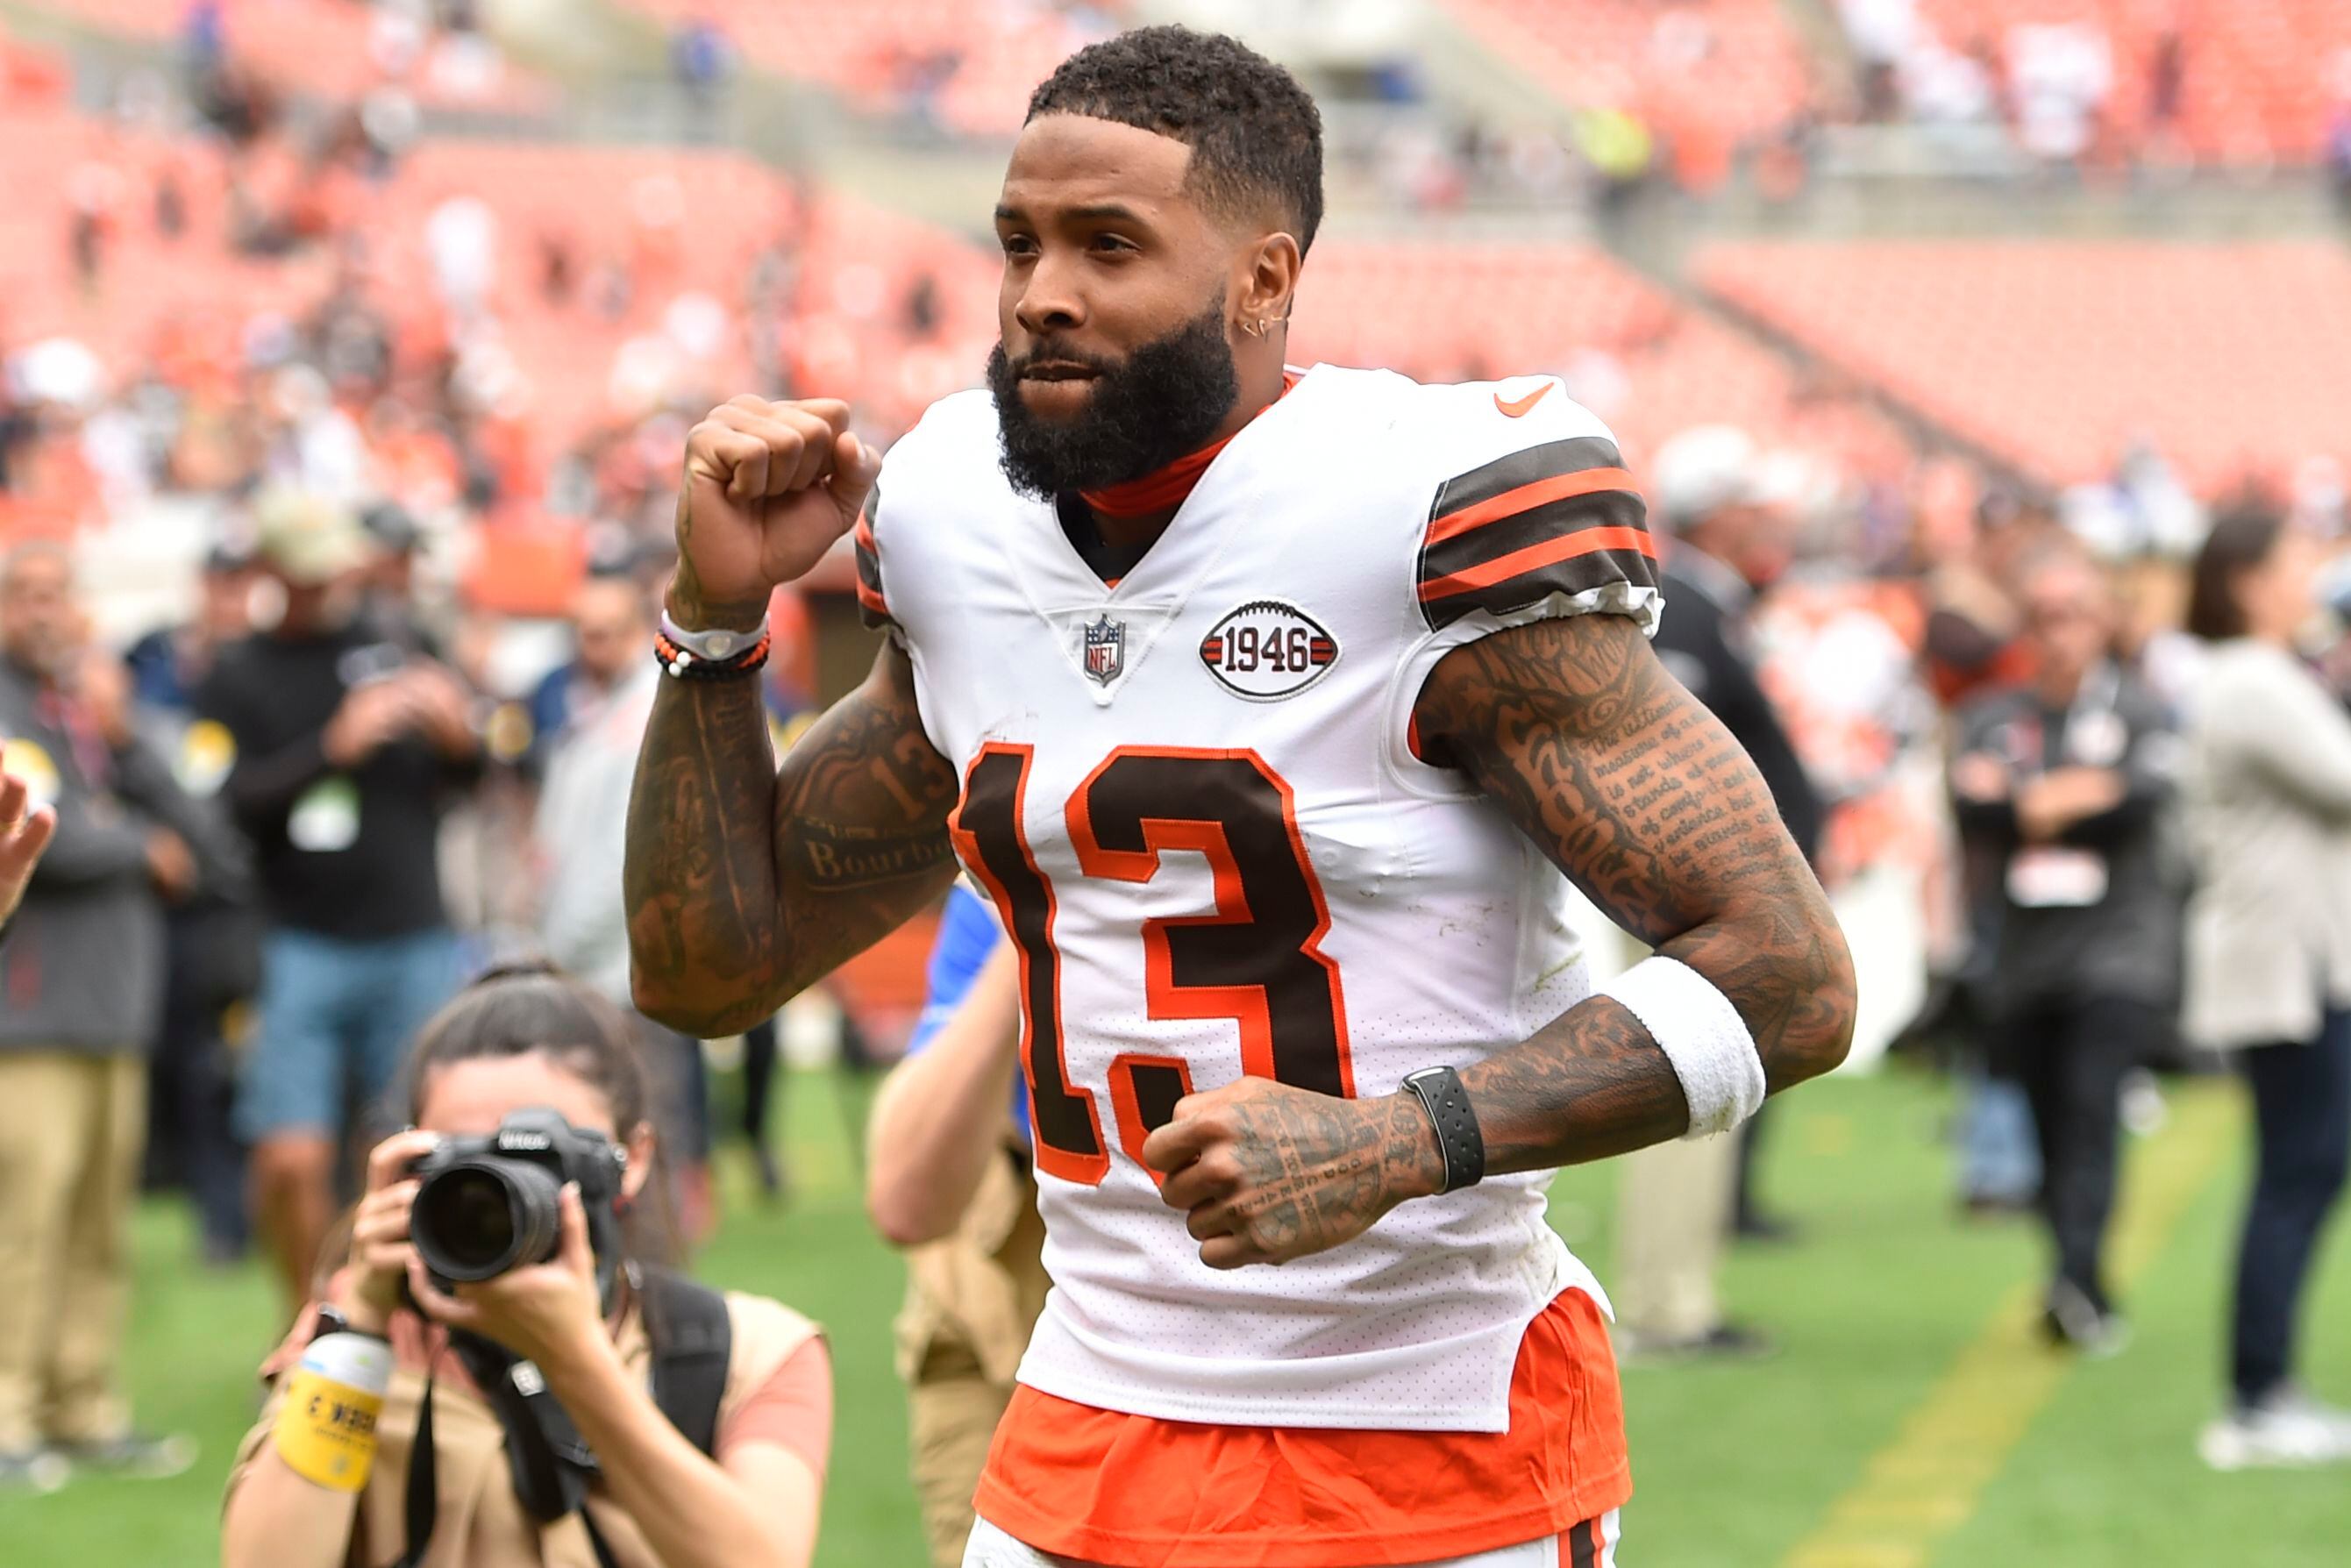 Browns release Landry after 4 seasons, now free agent